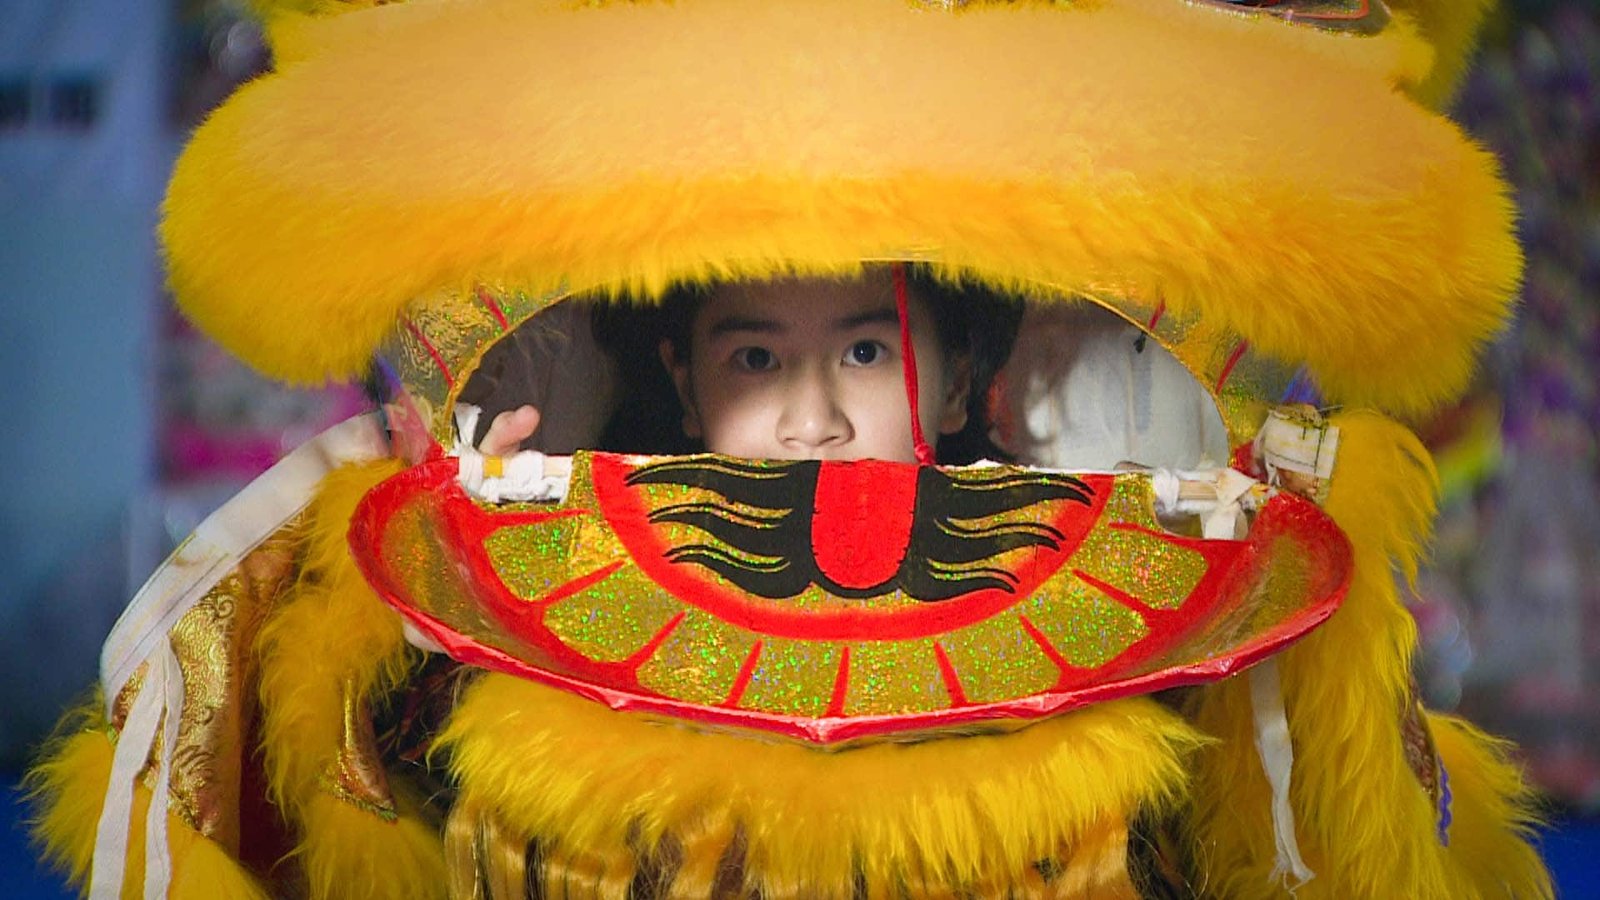 More women taking up once male dominated lion dance